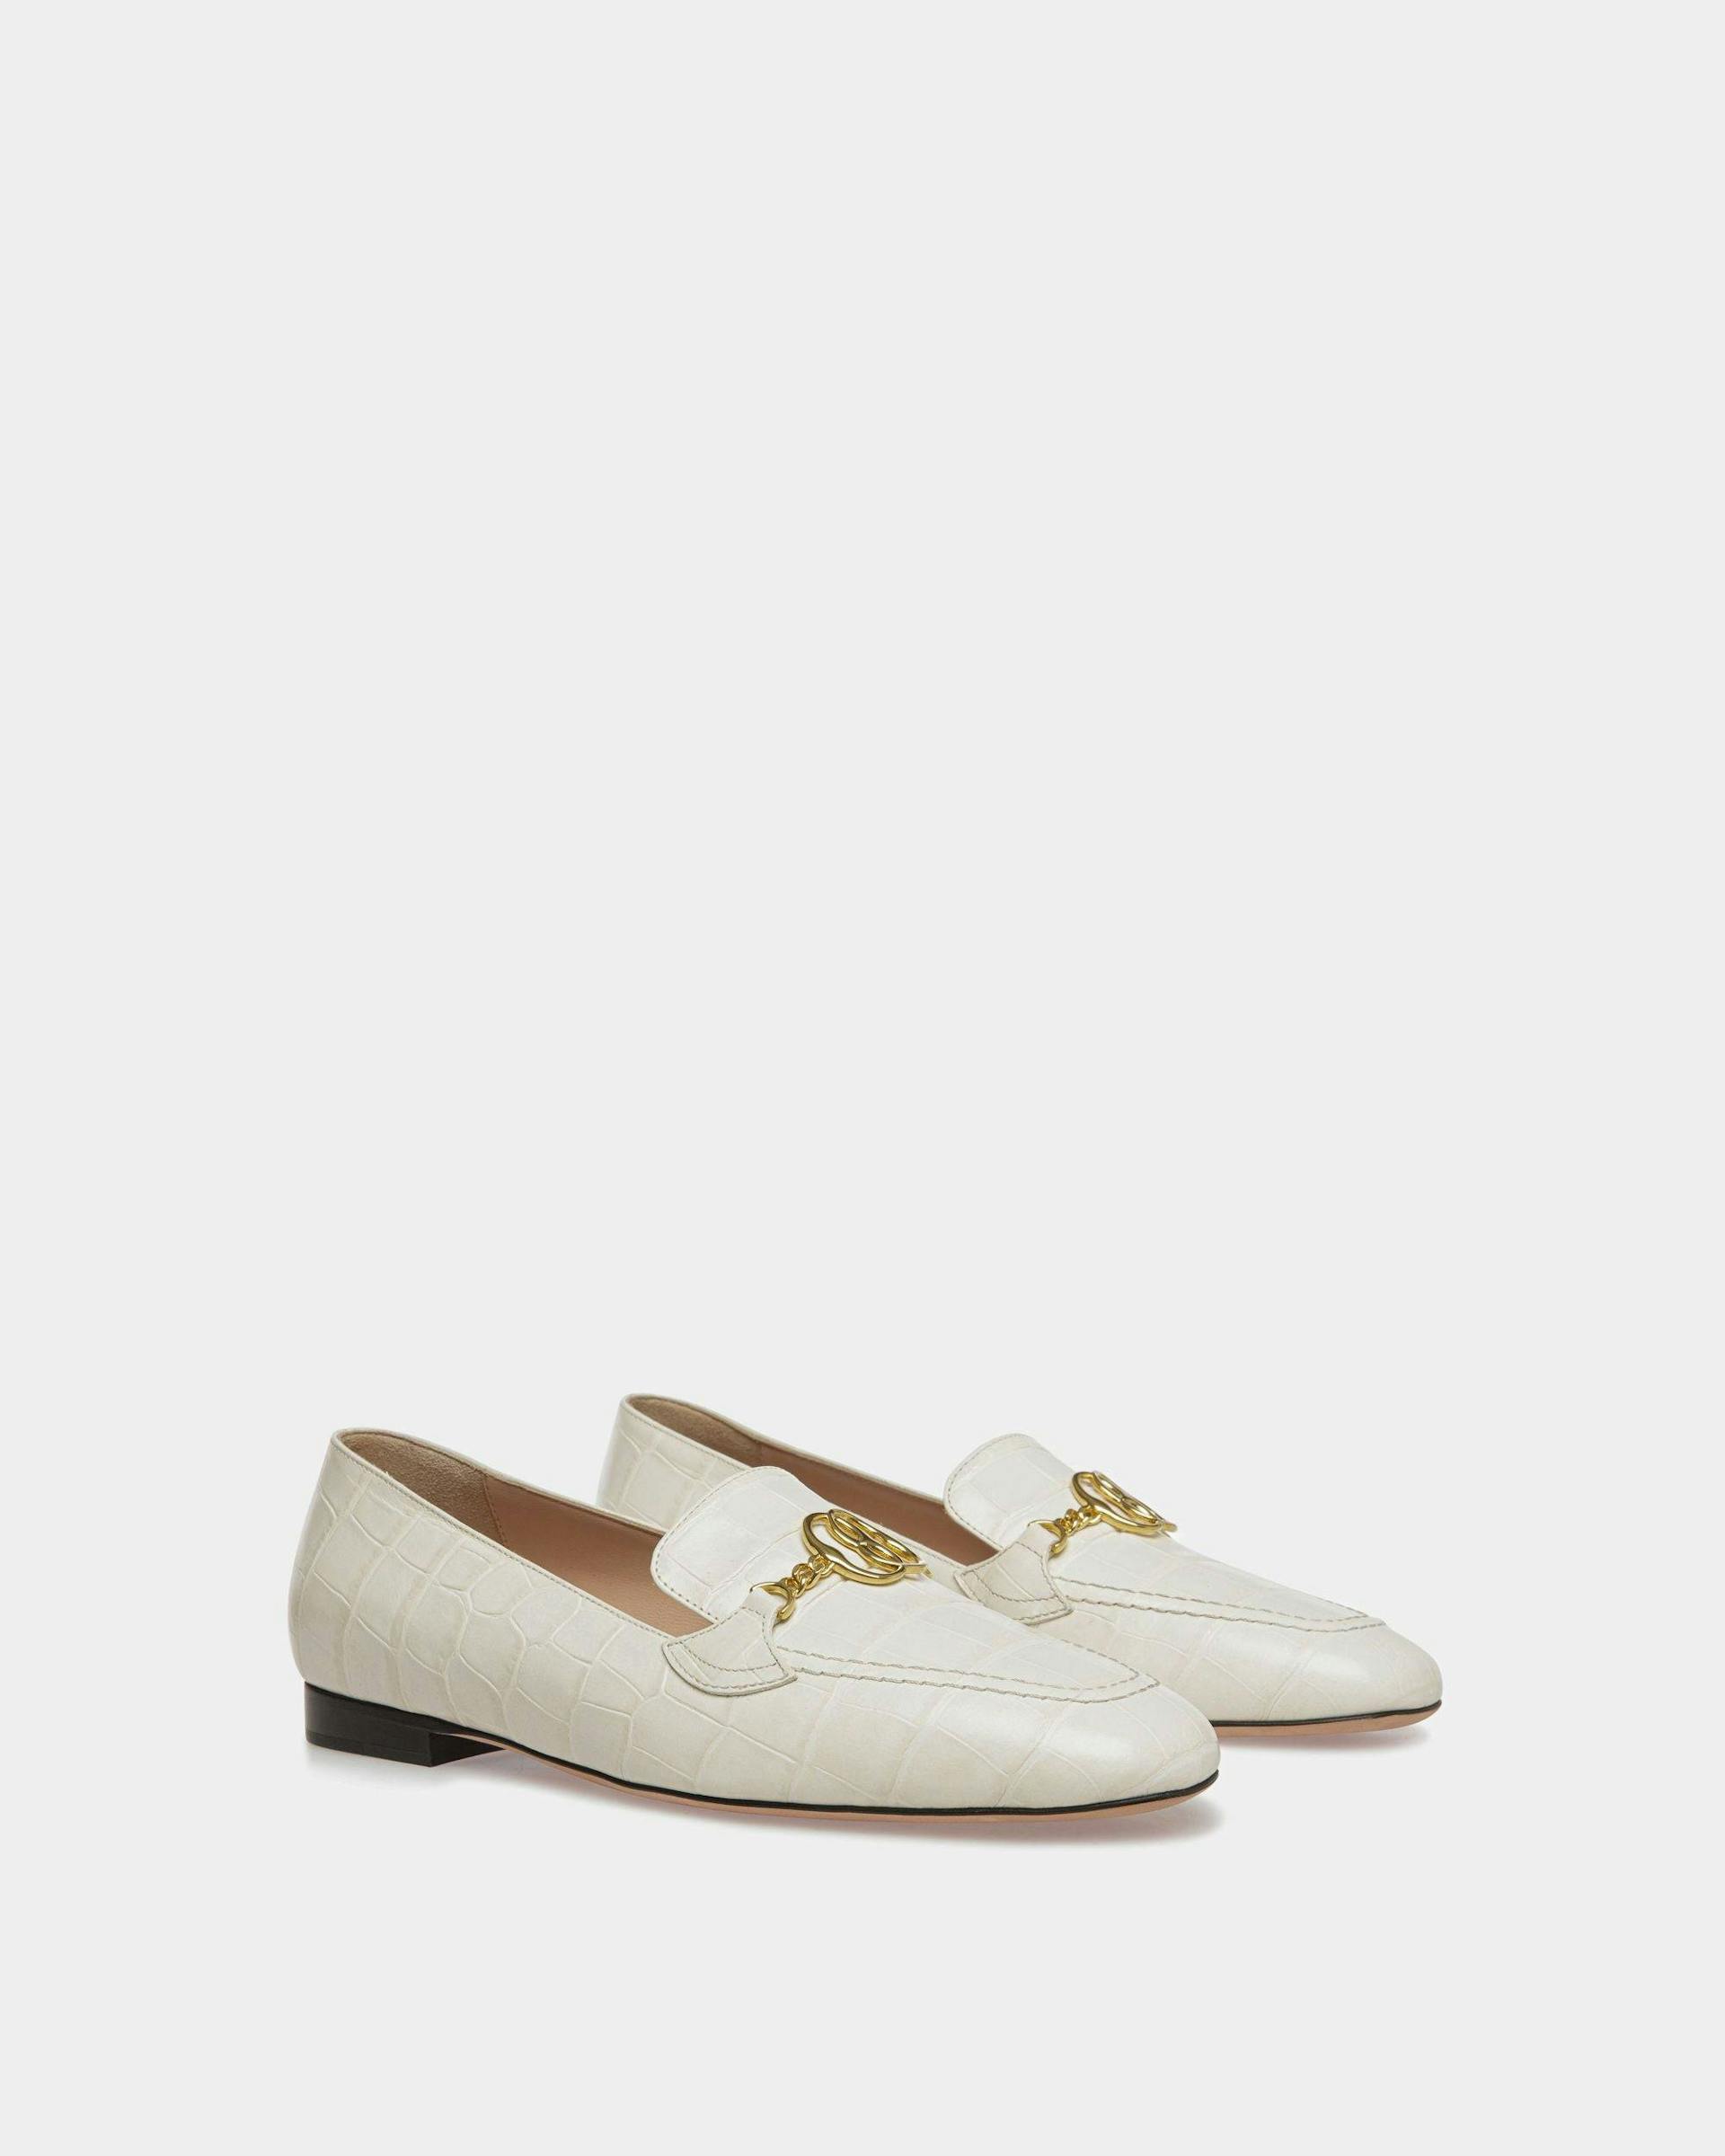 Daily Emblem Loafer In Bone Leather - Women's - Bally - 02